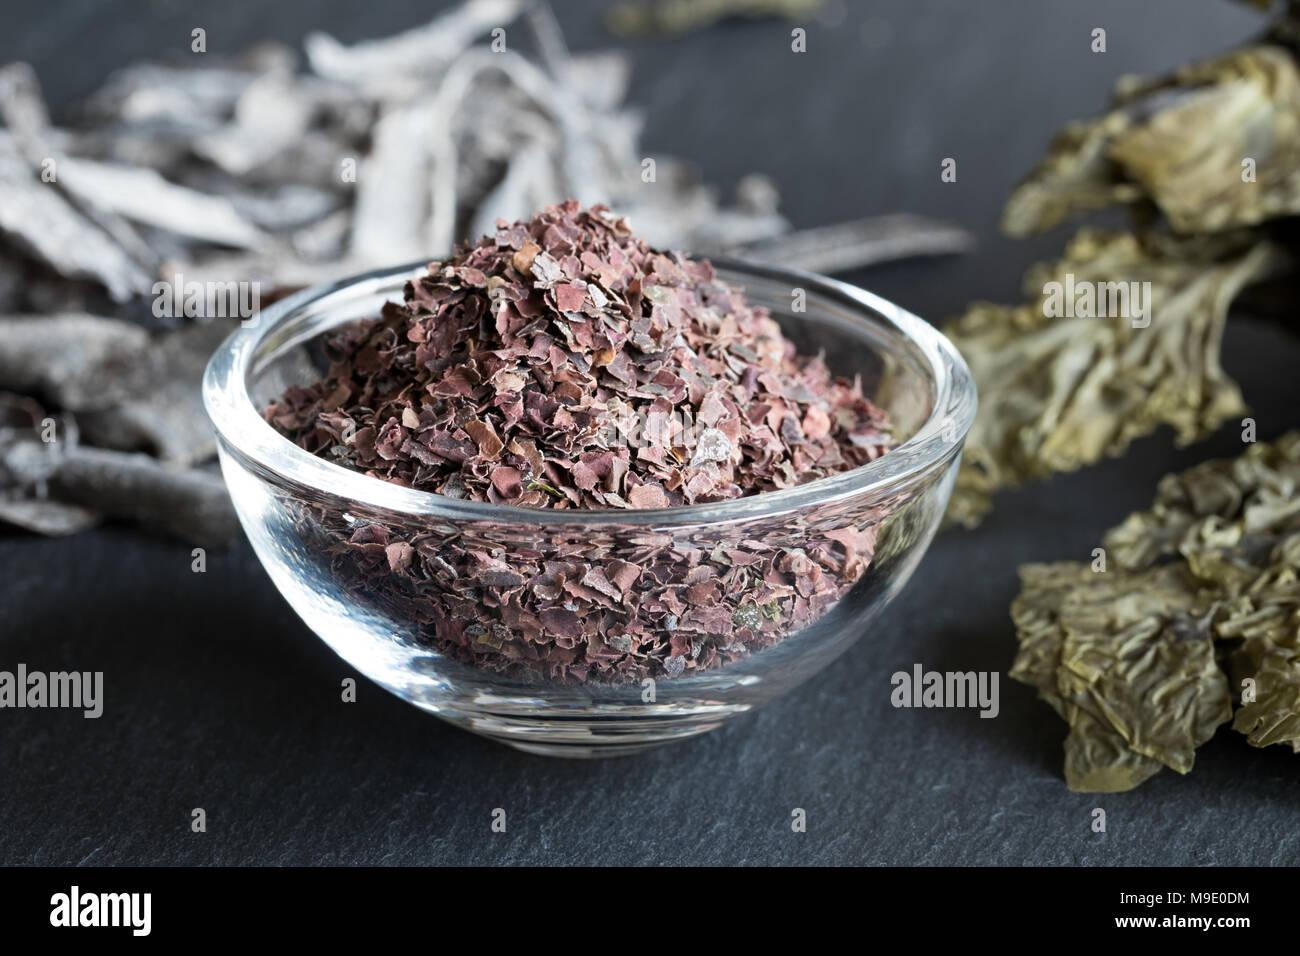 Dulse flakes in a glass bowl, with sea lettuce and other seaweed in the background Stock Photo